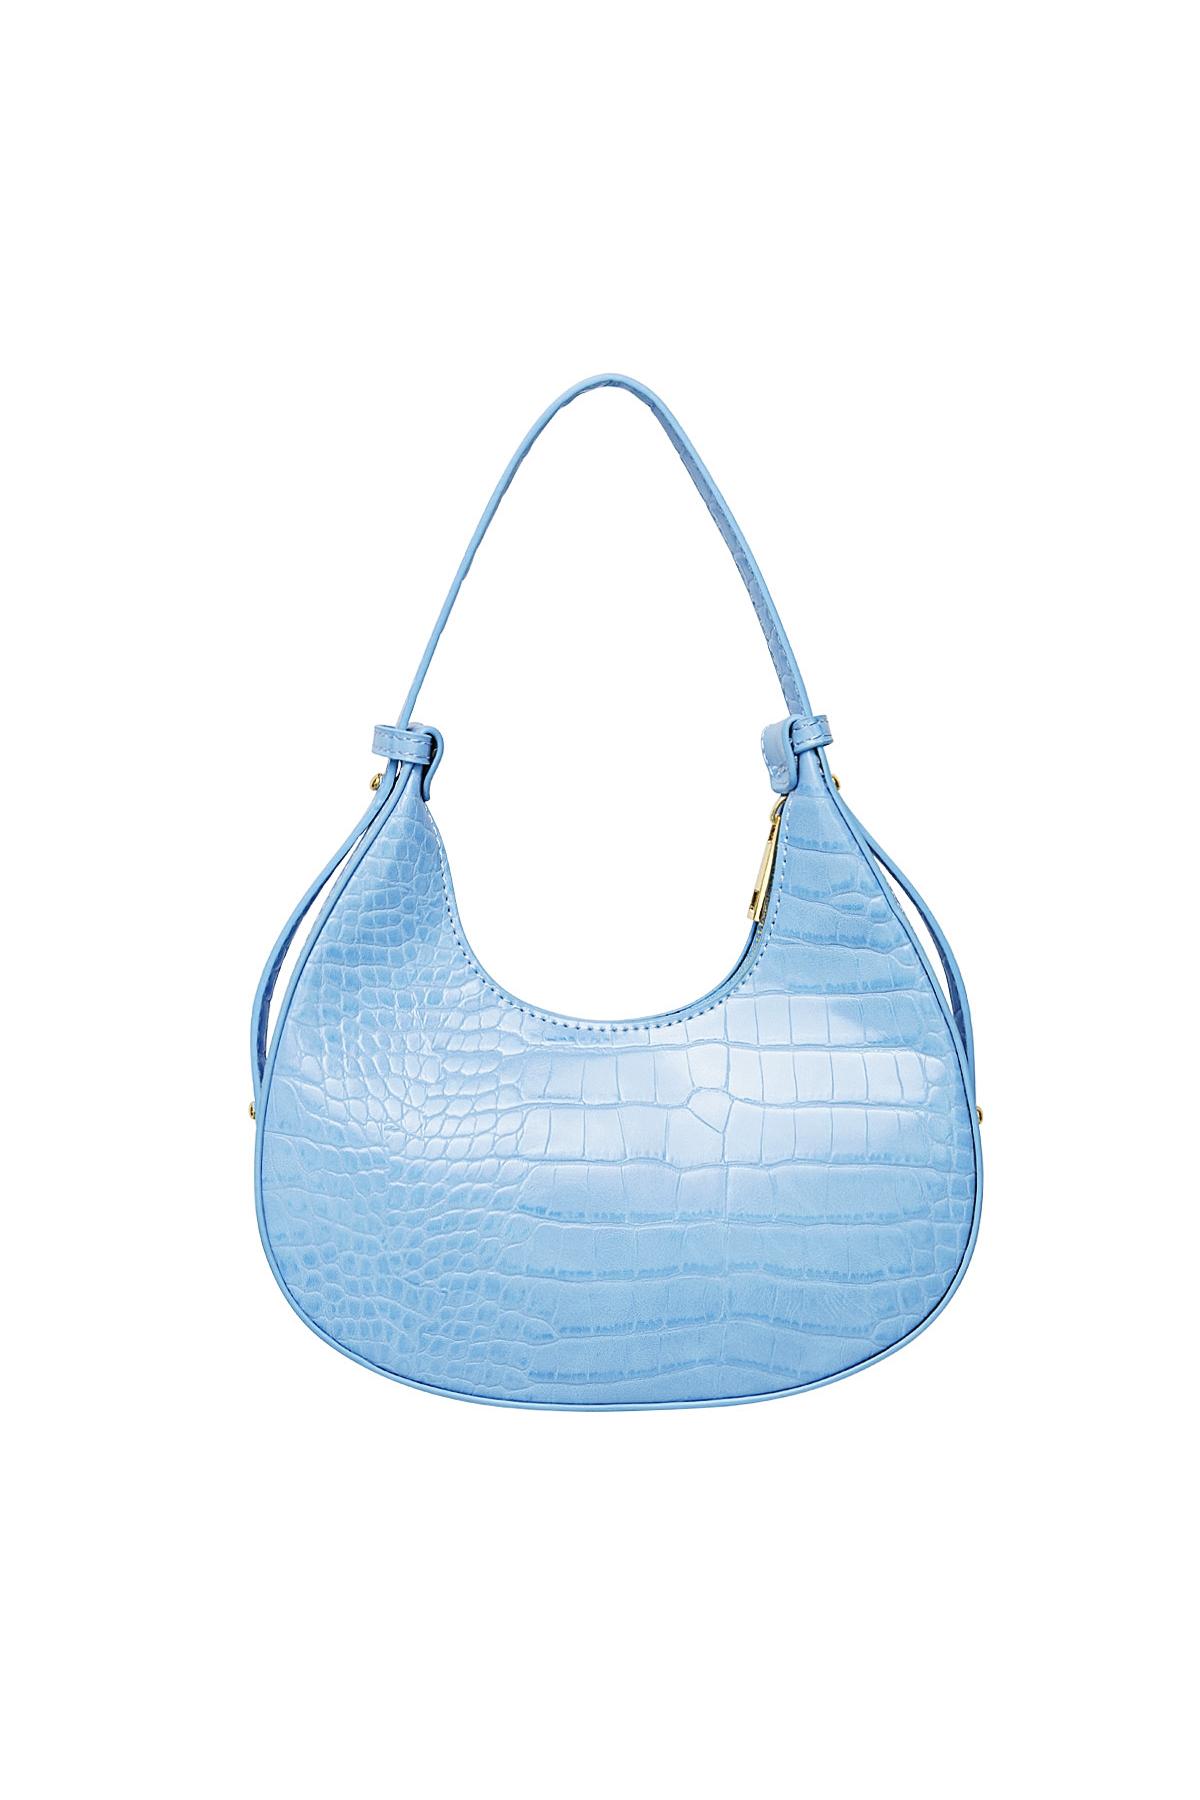 Borsa in similpelle con stampa Light Blue PU h5 